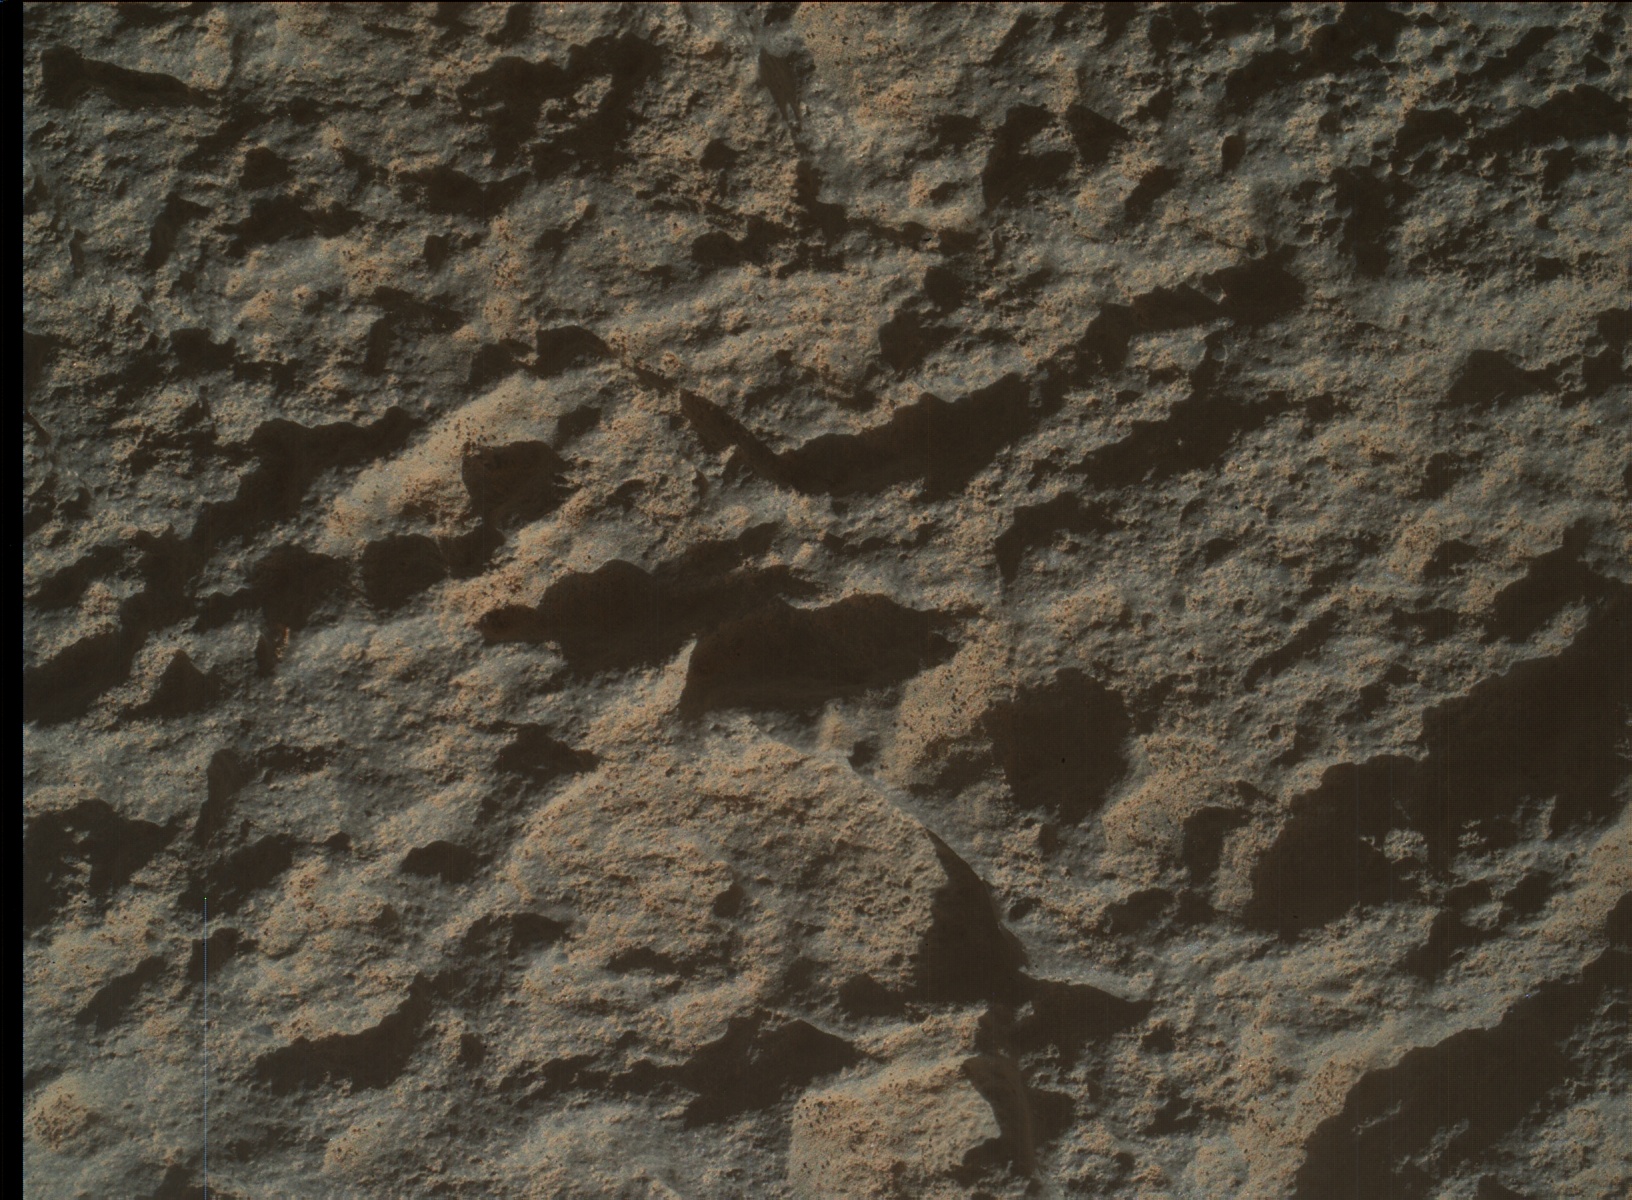 Nasa's Mars rover Curiosity acquired this image using its Mars Hand Lens Imager (MAHLI) on Sol 3316